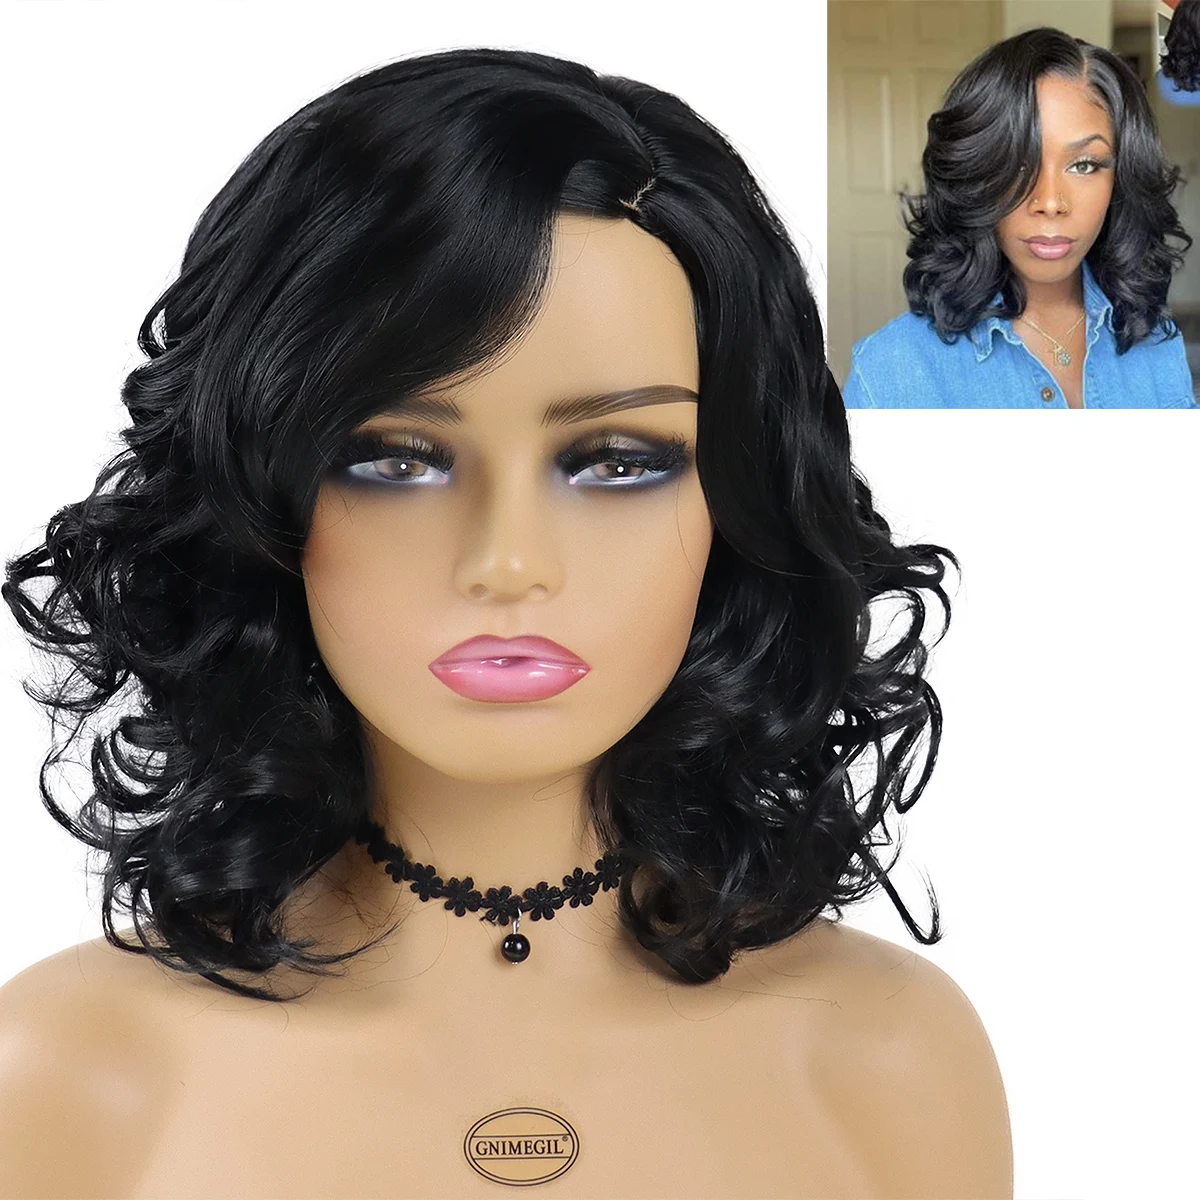 

GNIMEGIL Synthetic Hair Curly Wigs for Women Black Short Wig with Side Bangs Natural Hairstyles Mommy Wigs Elderly Wave Wig